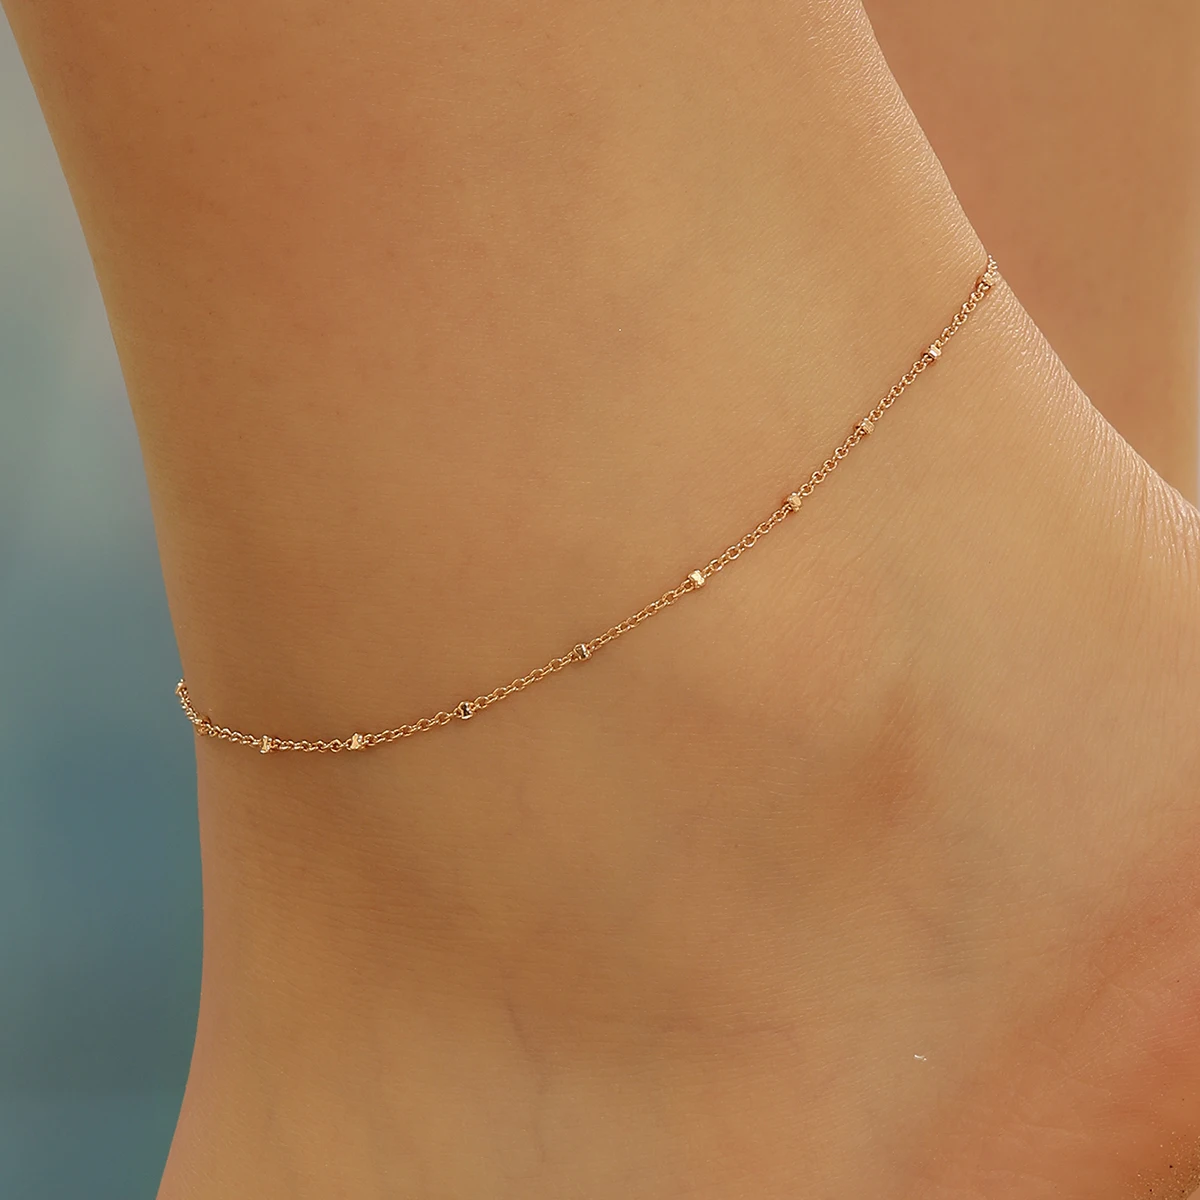 Kinitial Exquisite and fashionable laser plated anklet, a beautiful special style anklet for her anniversary gift